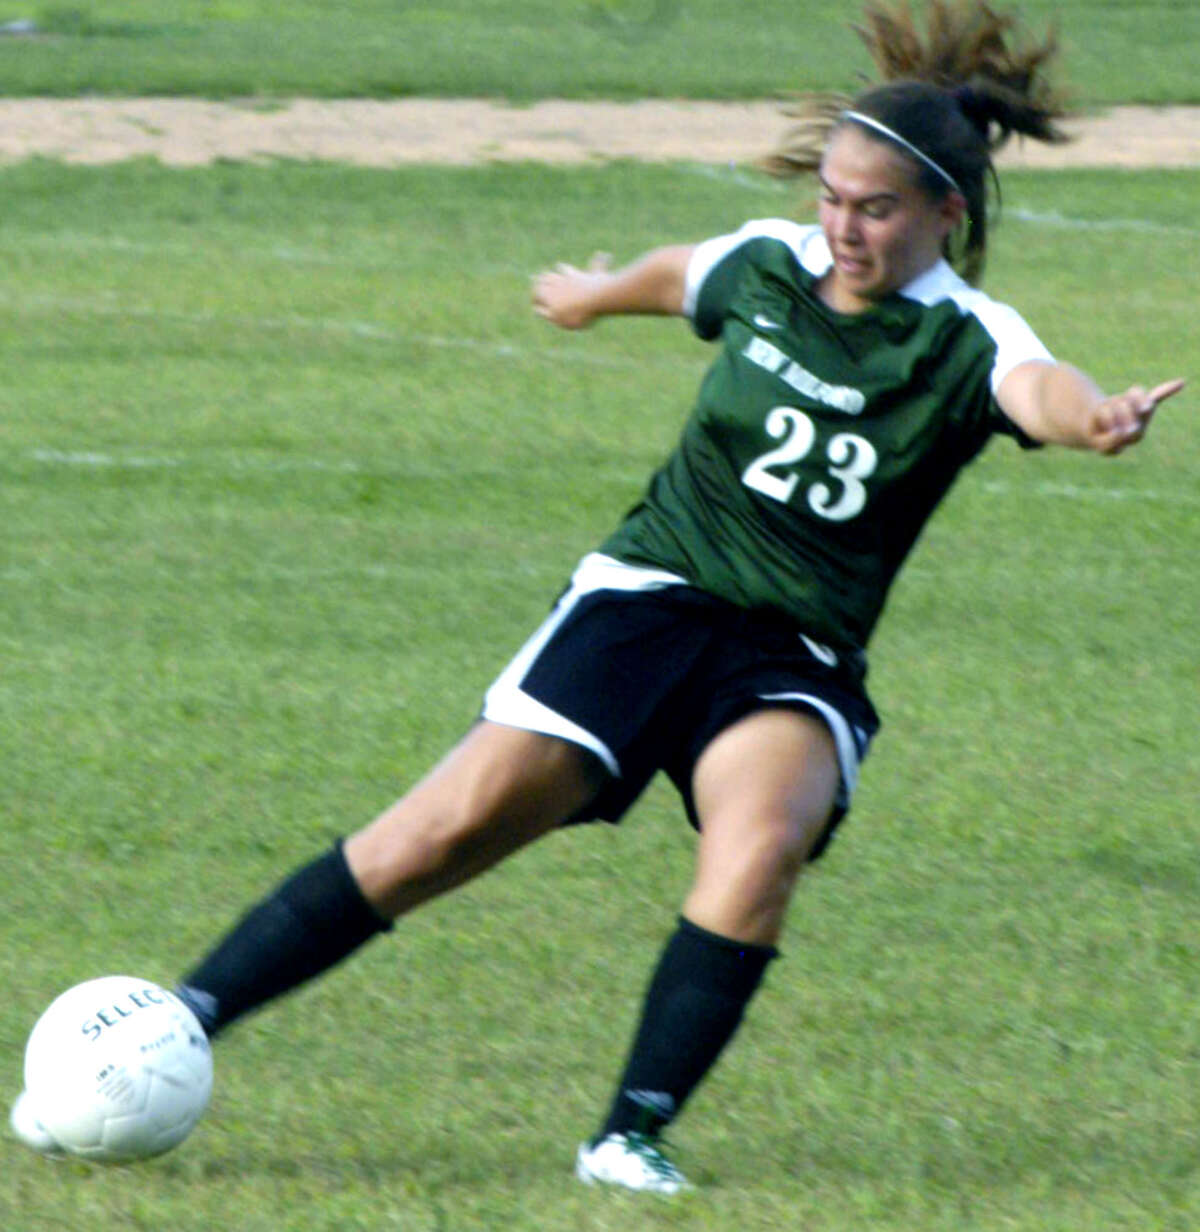 Bre Rehaag is expected to play an integral role this fall for New Milford High School girls' soccer, September 2012